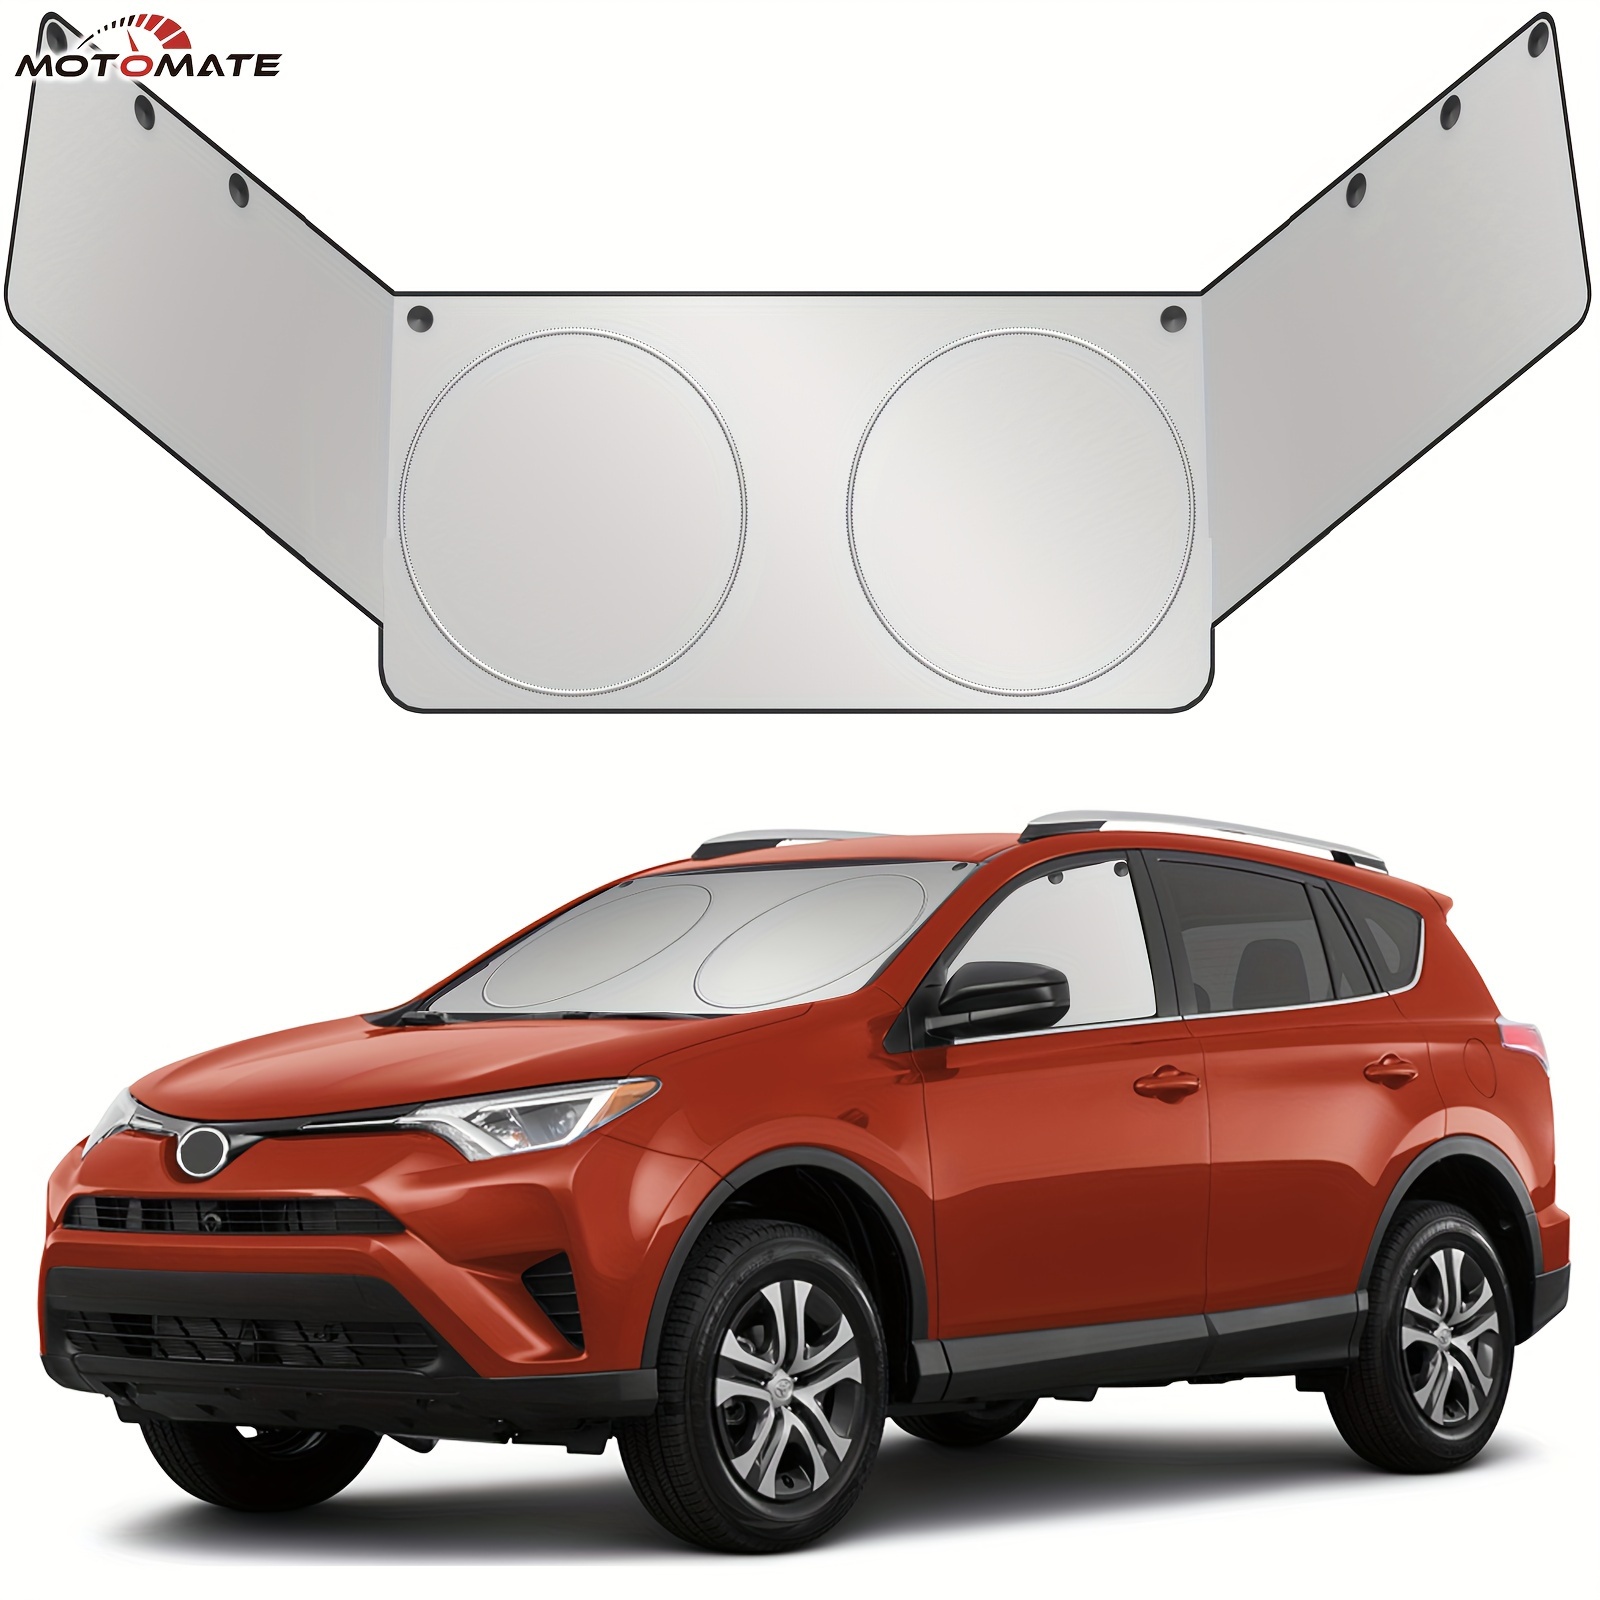 

Motomate Windshield Sun Shade- Front And Side Window Sun Cover Block Sun Heat Protect Vehicle Interior Accessories Sunshades Prevent Prying And Protect Privacy (front + Side(m))